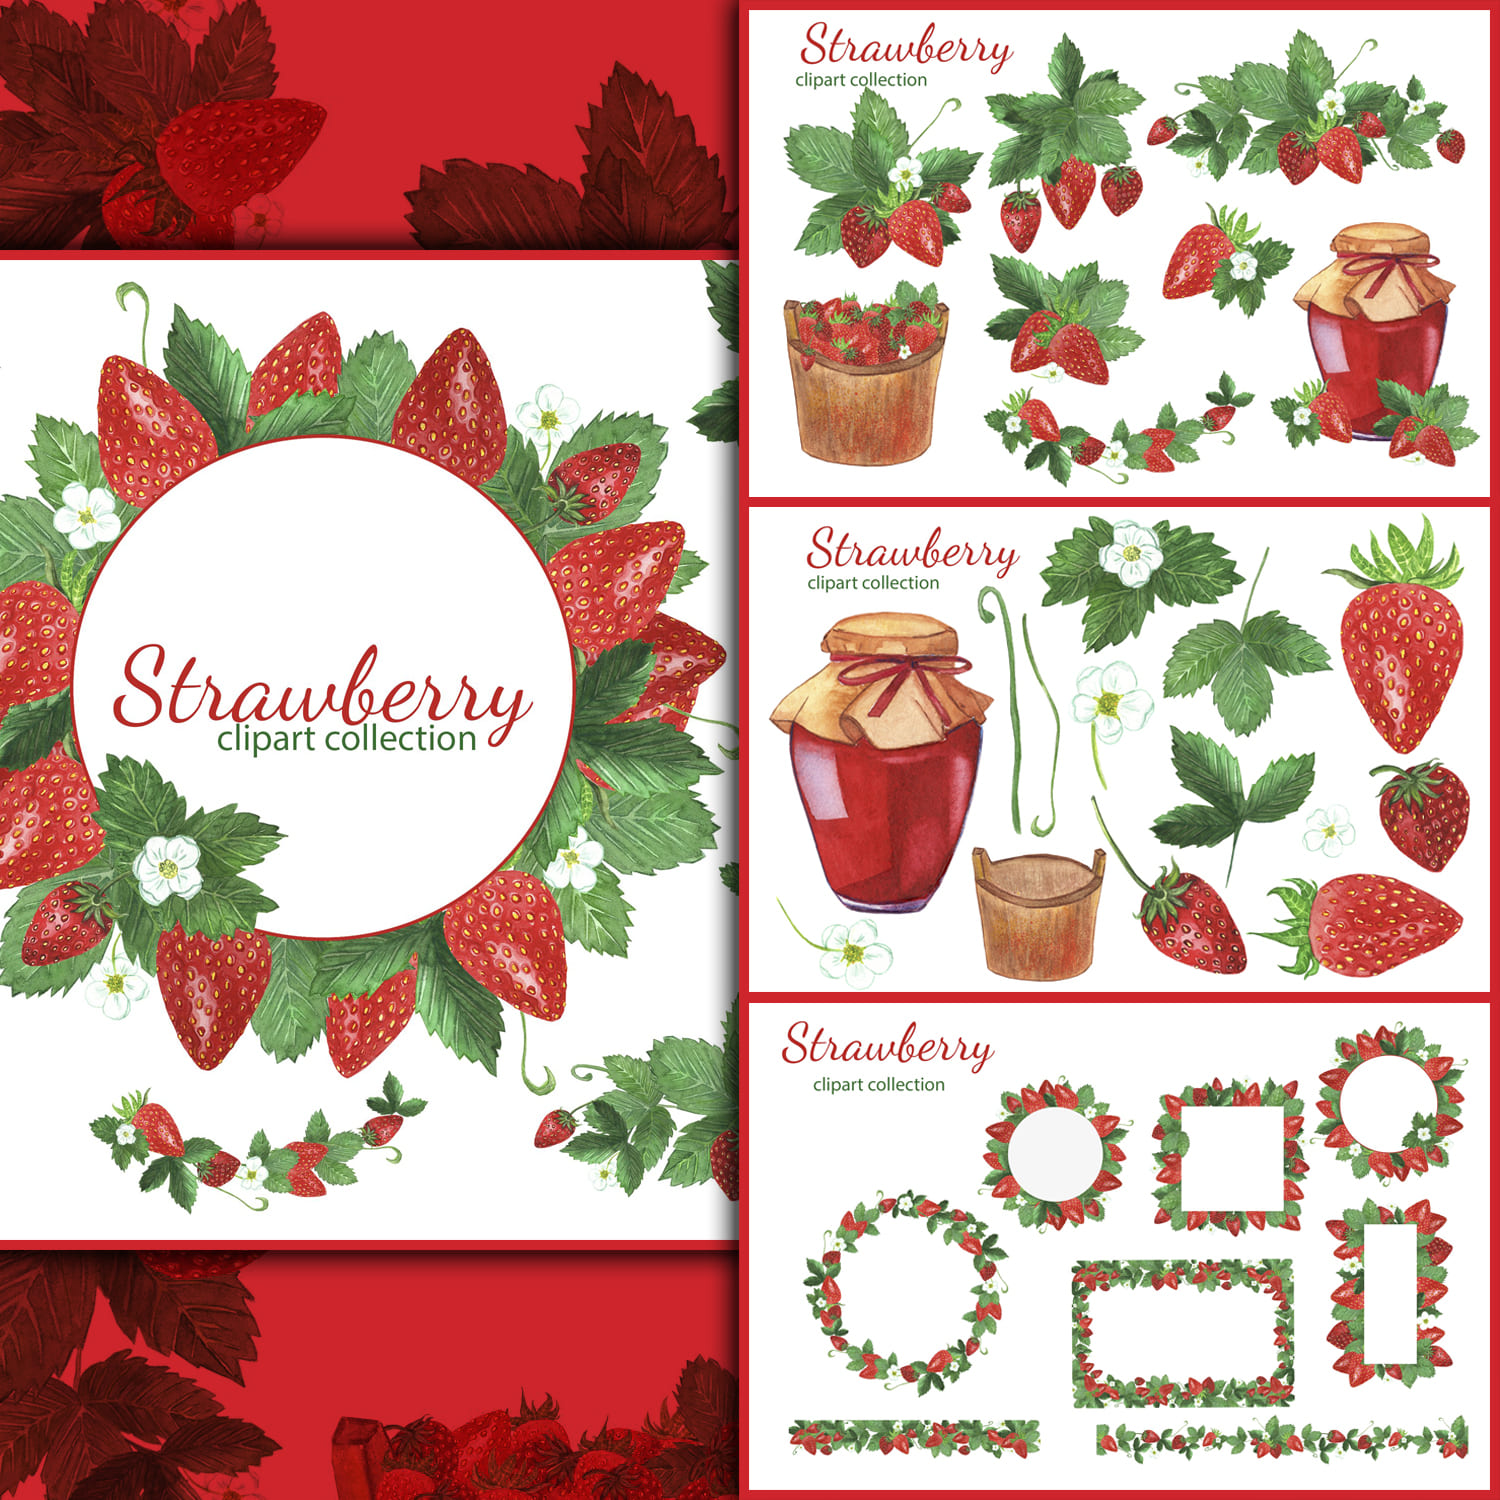 Slides with strawberries and possible options for using this clipart are shown on a red background.